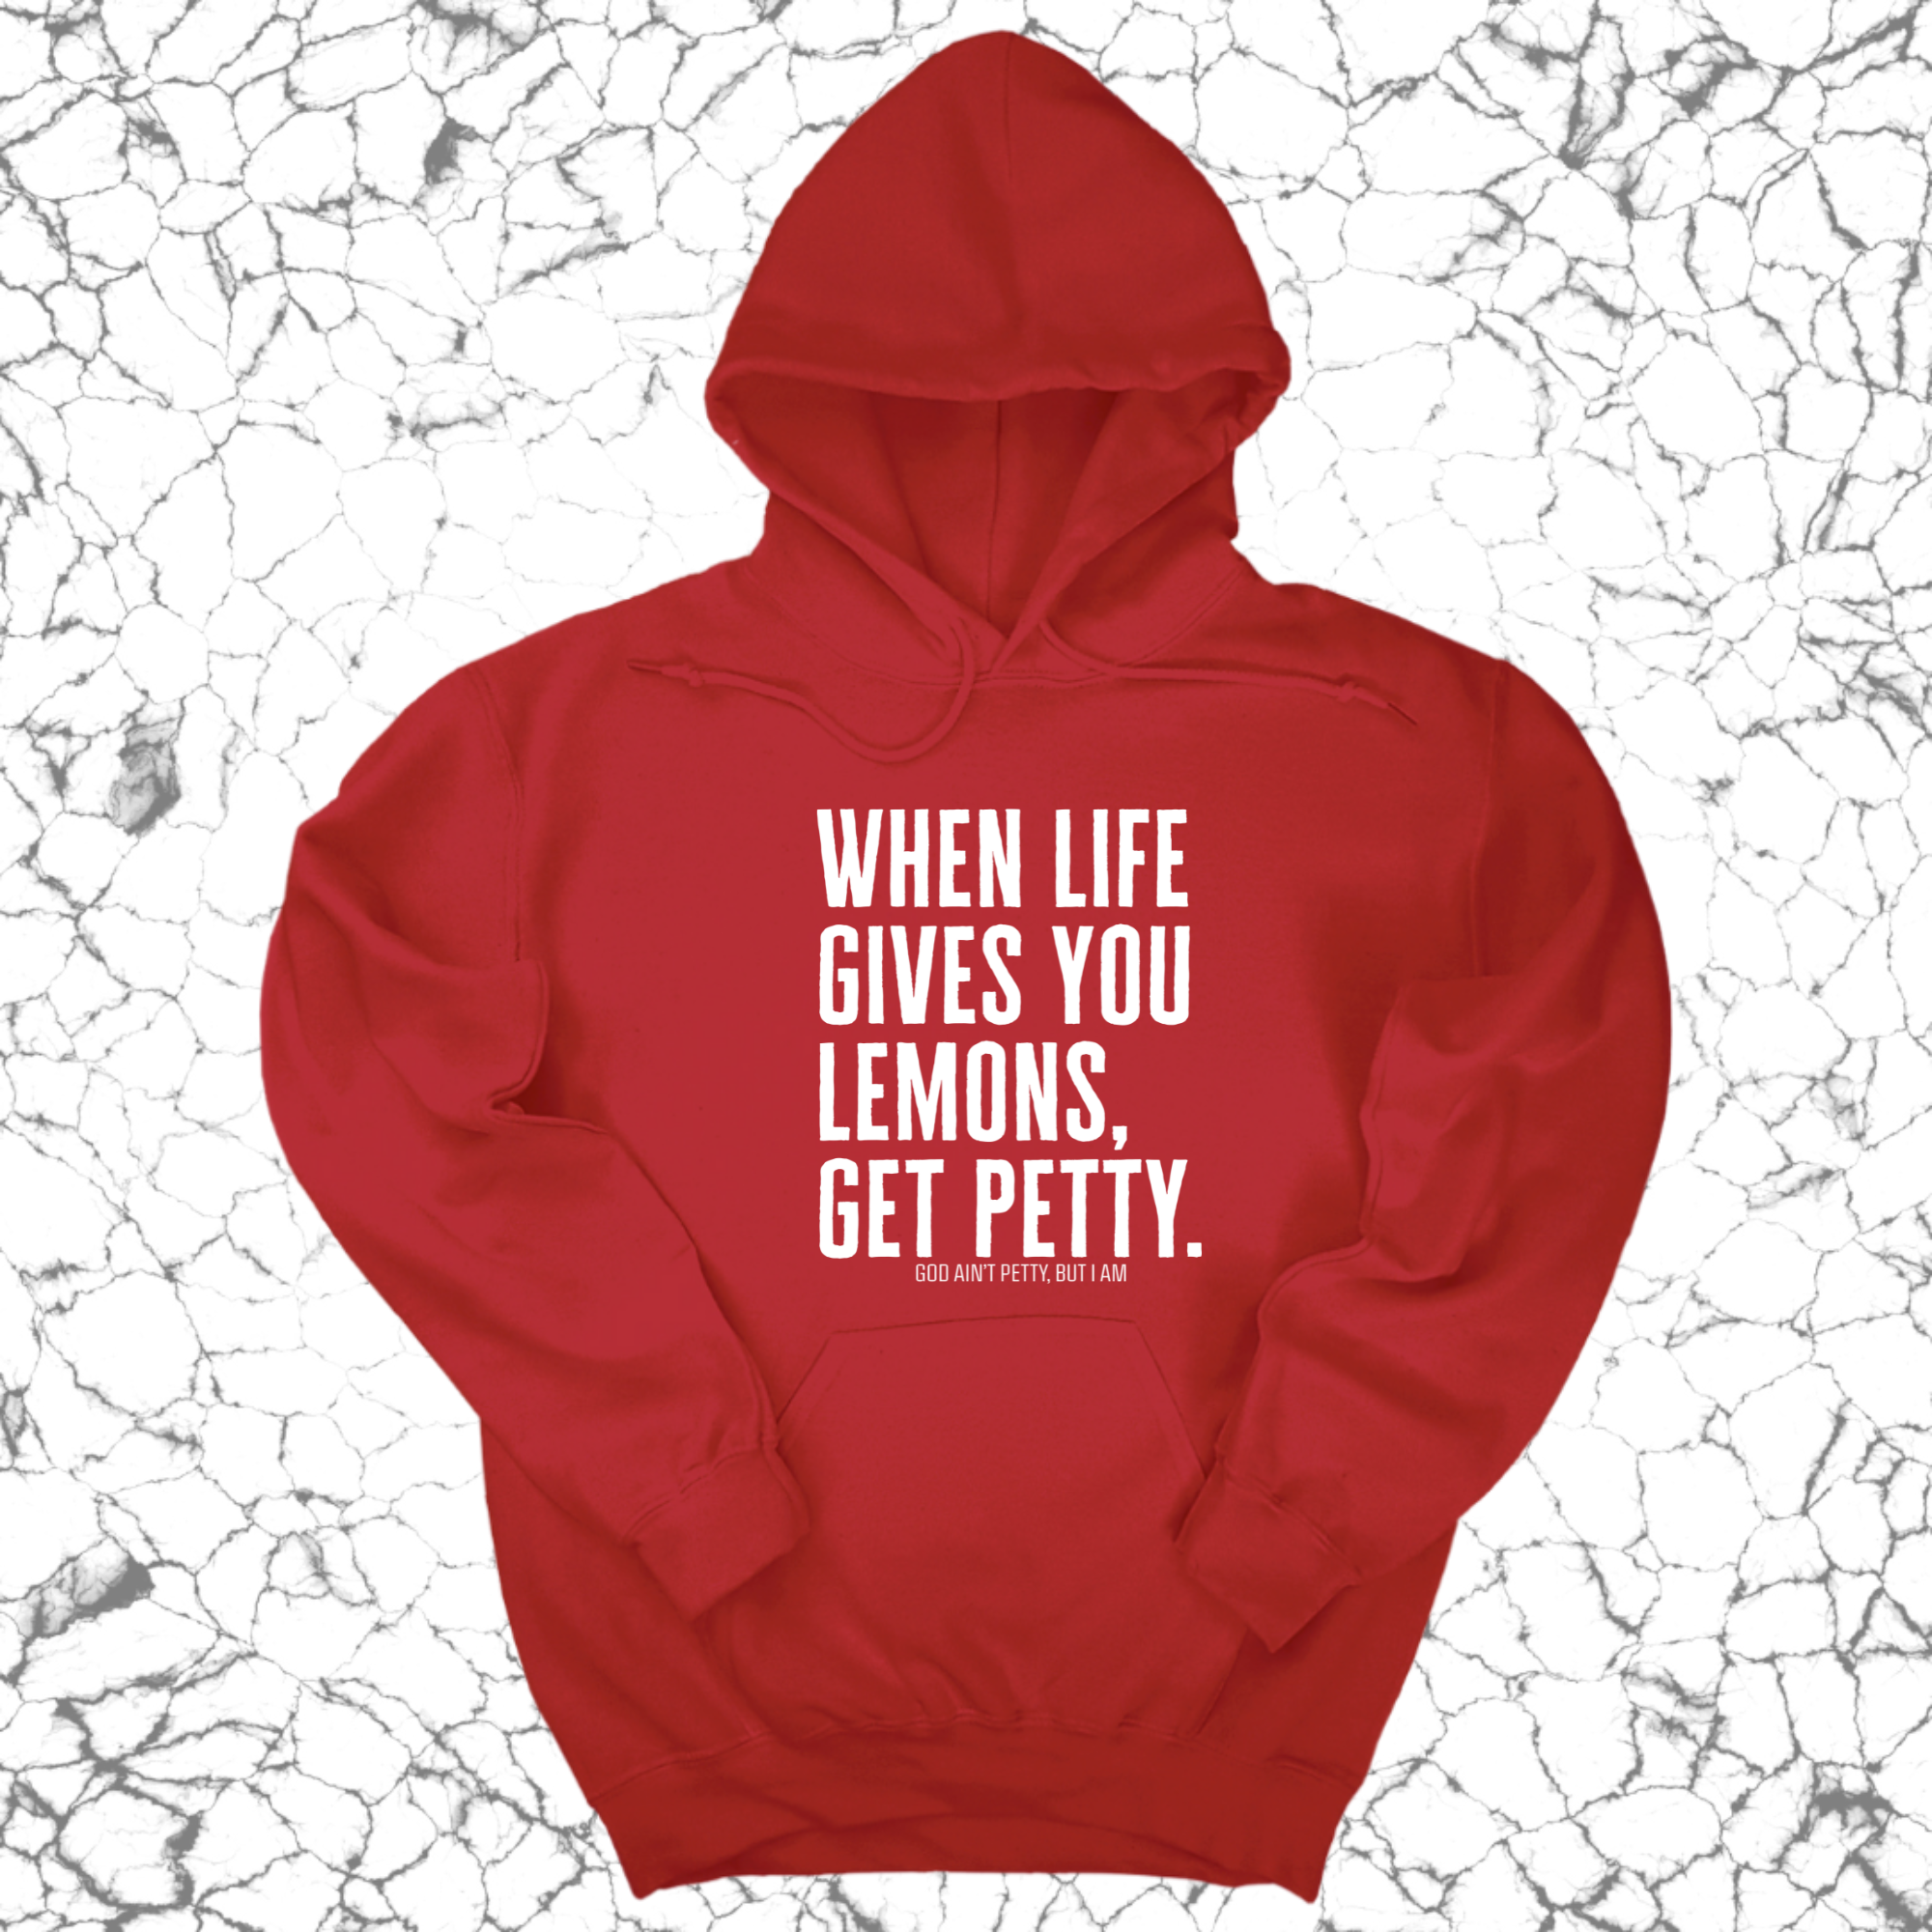 When life gives you lemons, get petty Unisex Hoodie-Hoodie-The Original God Ain't Petty But I Am